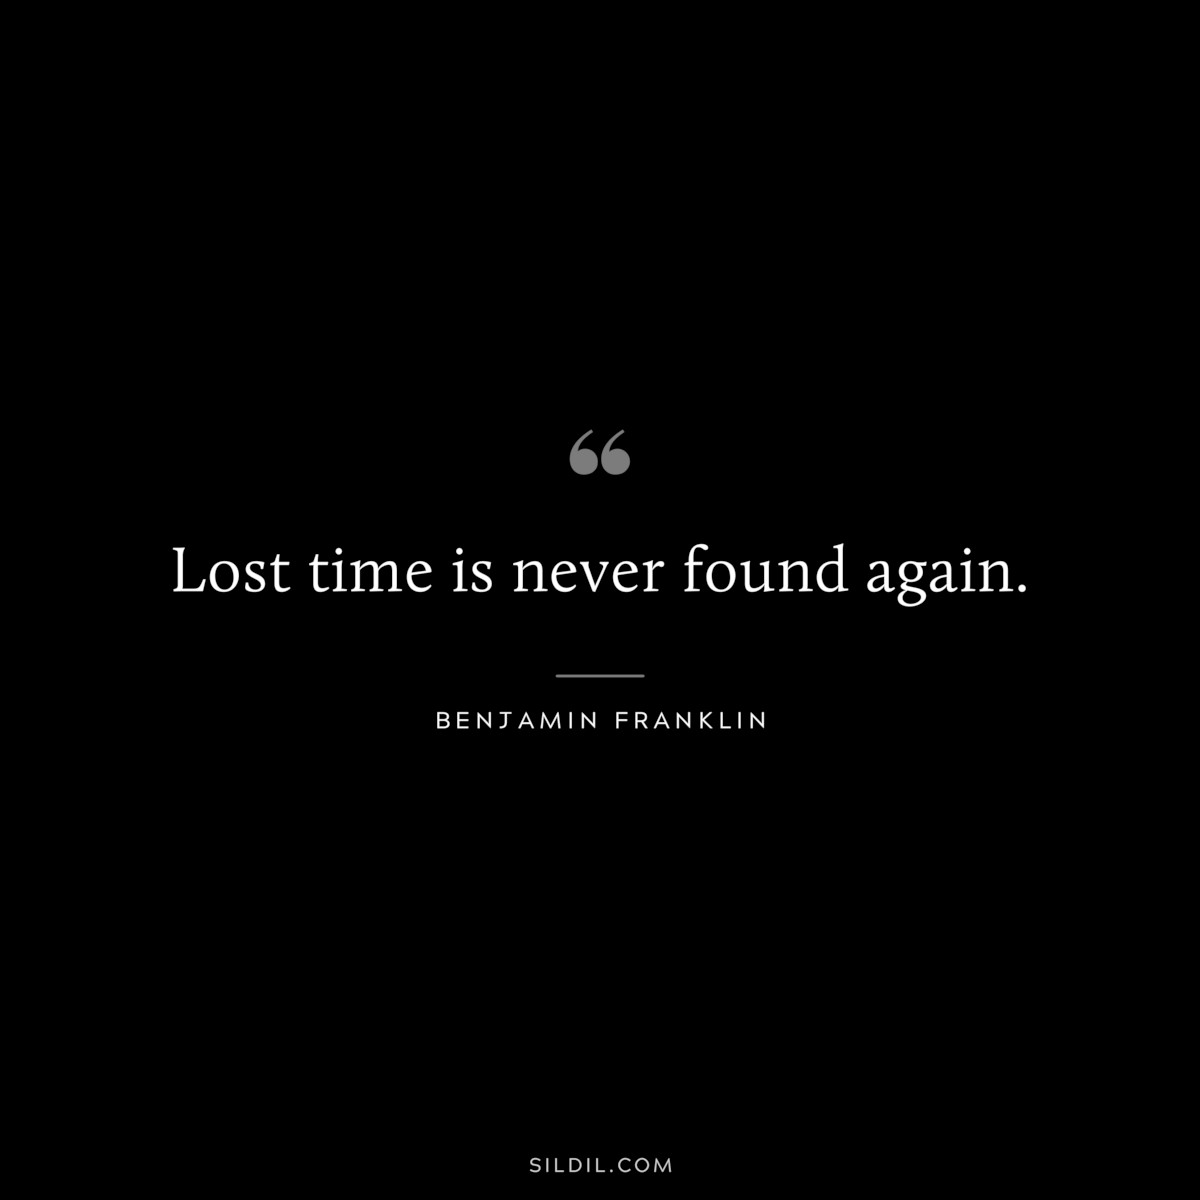 Lost time is never found again. ― Benjamin Franklin